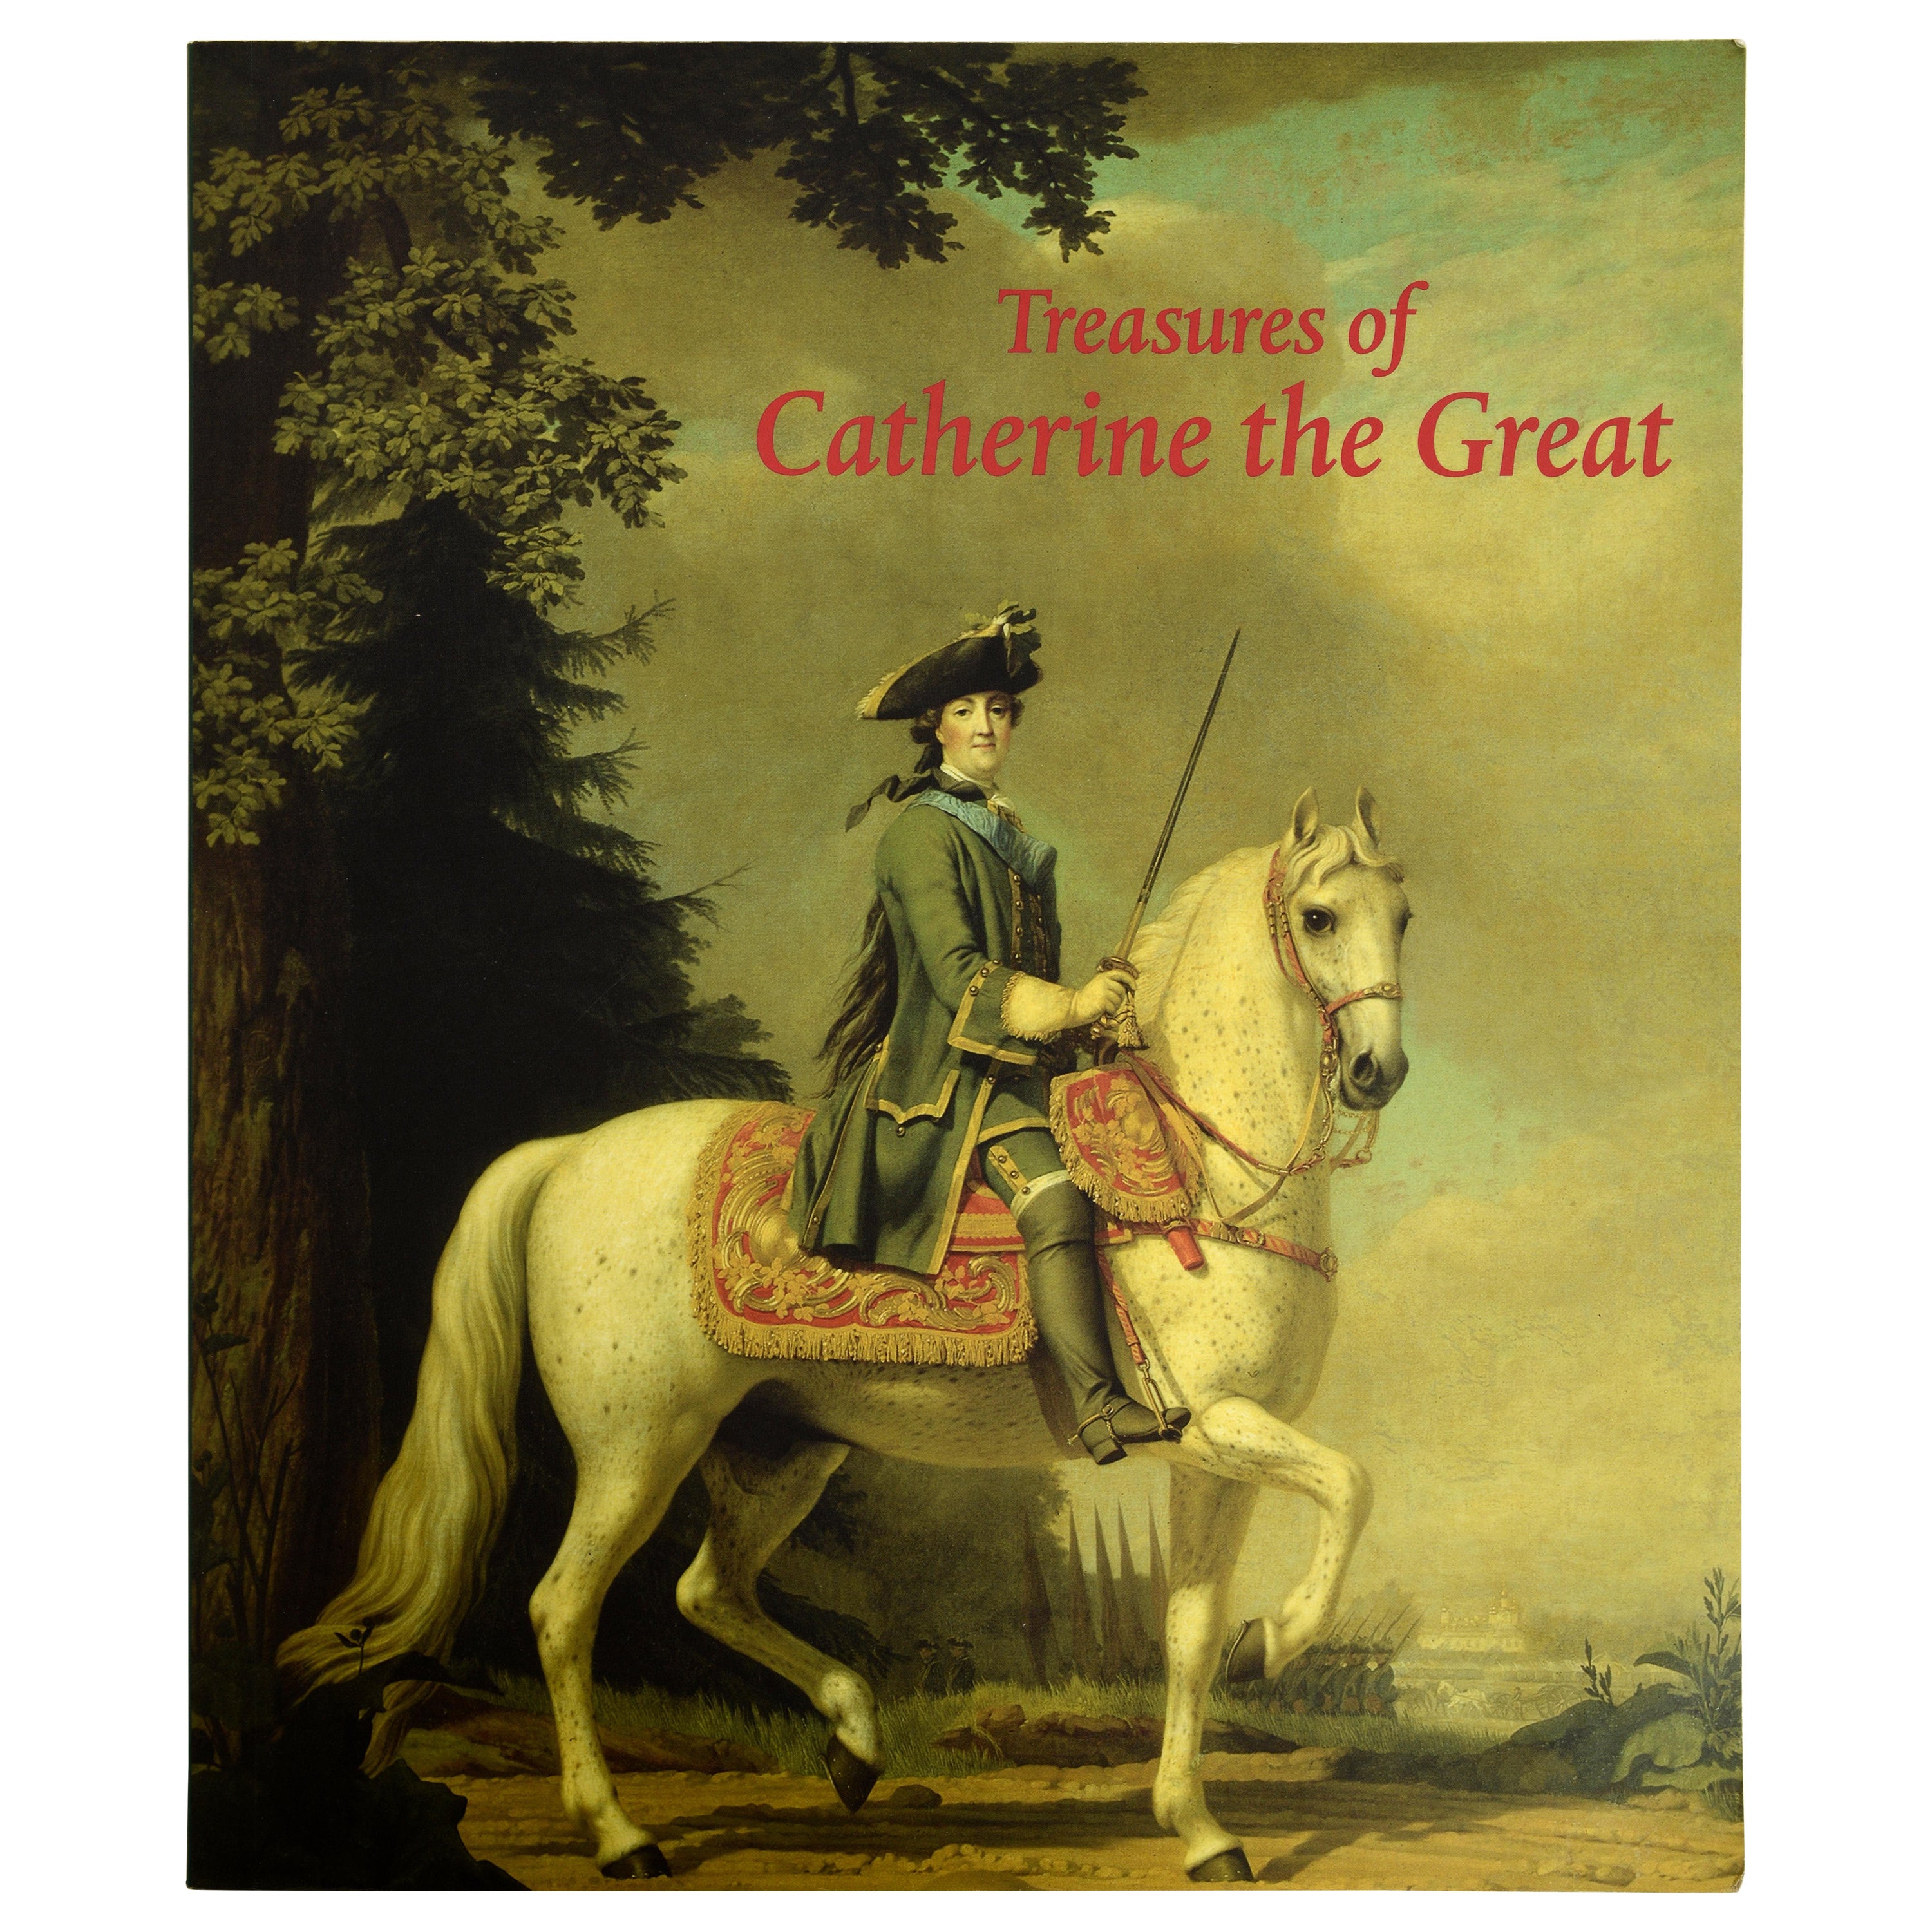 Treasures of Catherine the Great, 1st Ed Exhibition Catalog For Sale